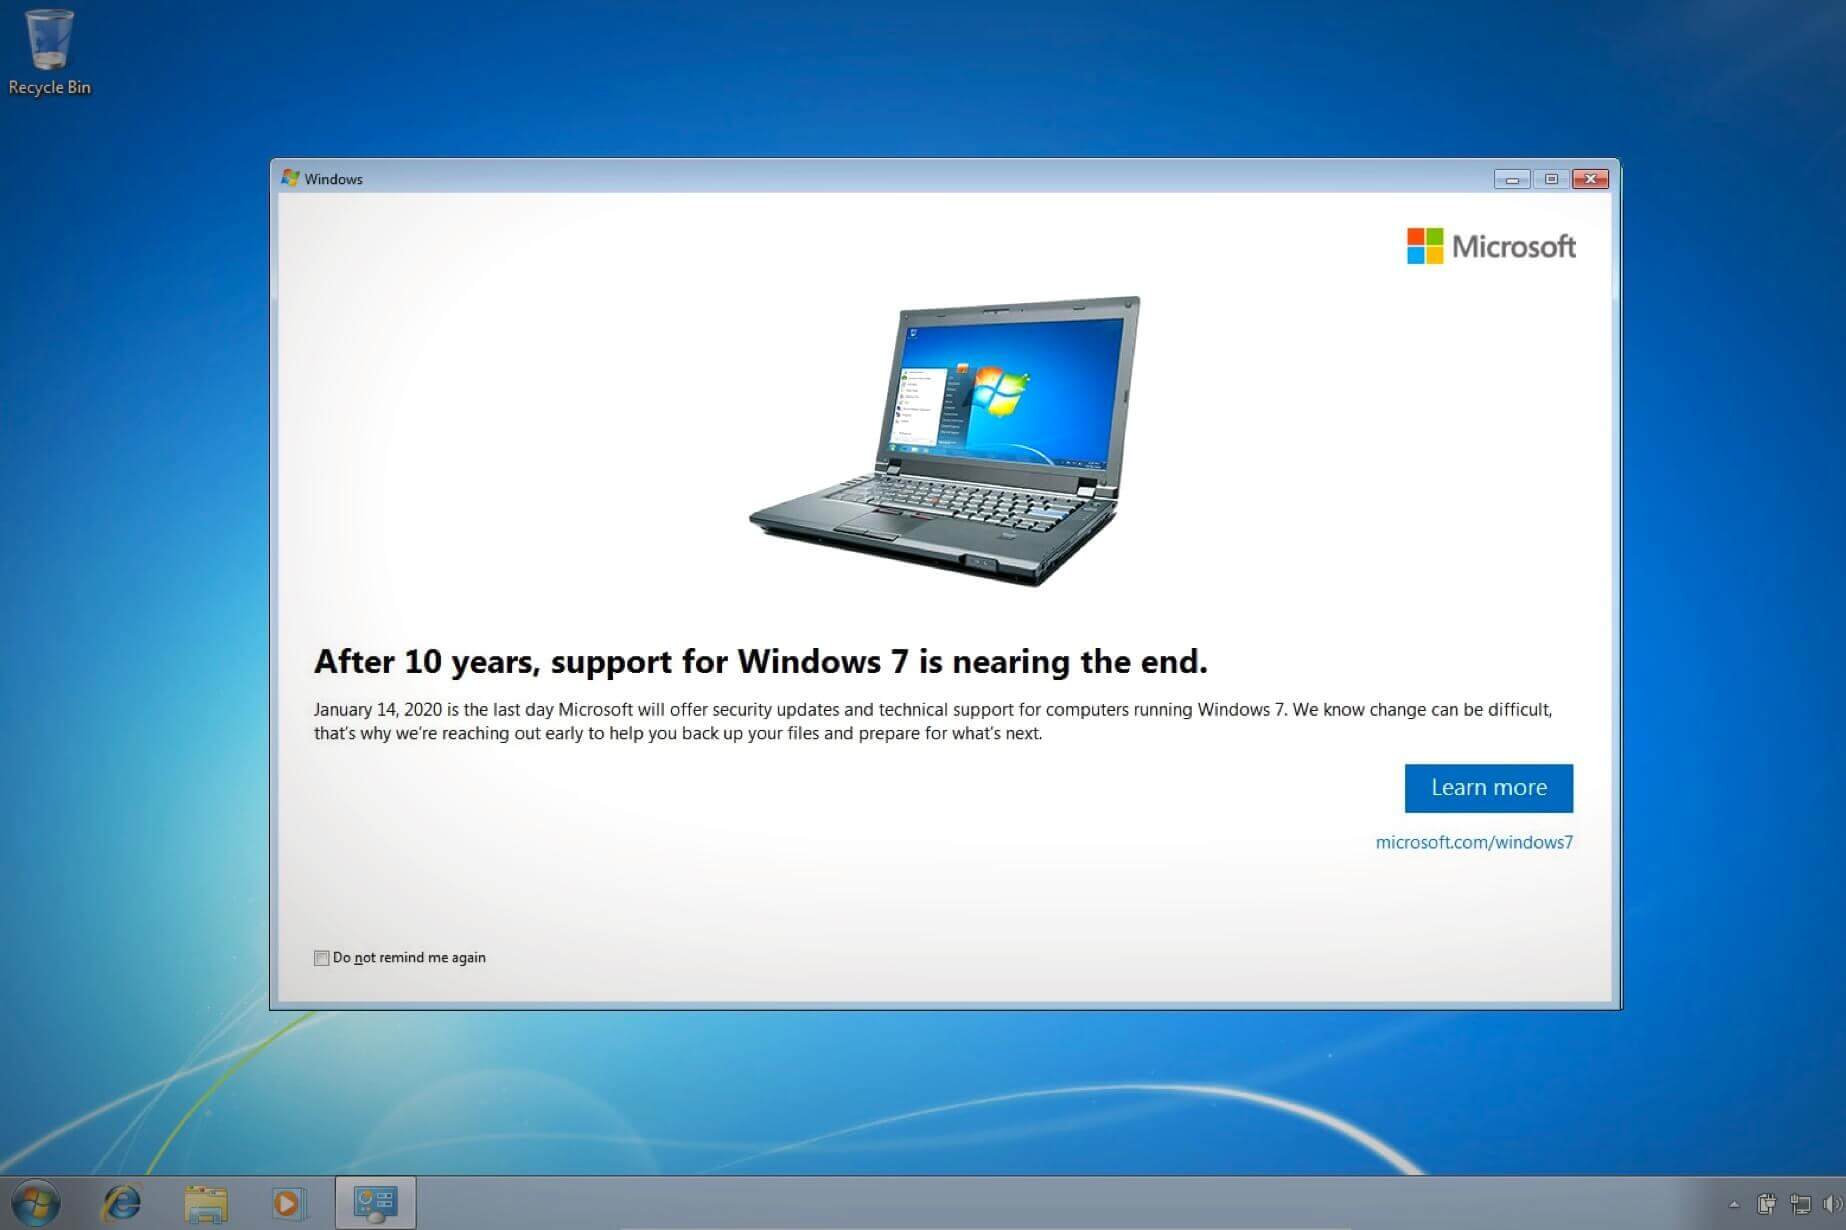 Free Software Foundation 'demands' Windows 7 be released as free software 1